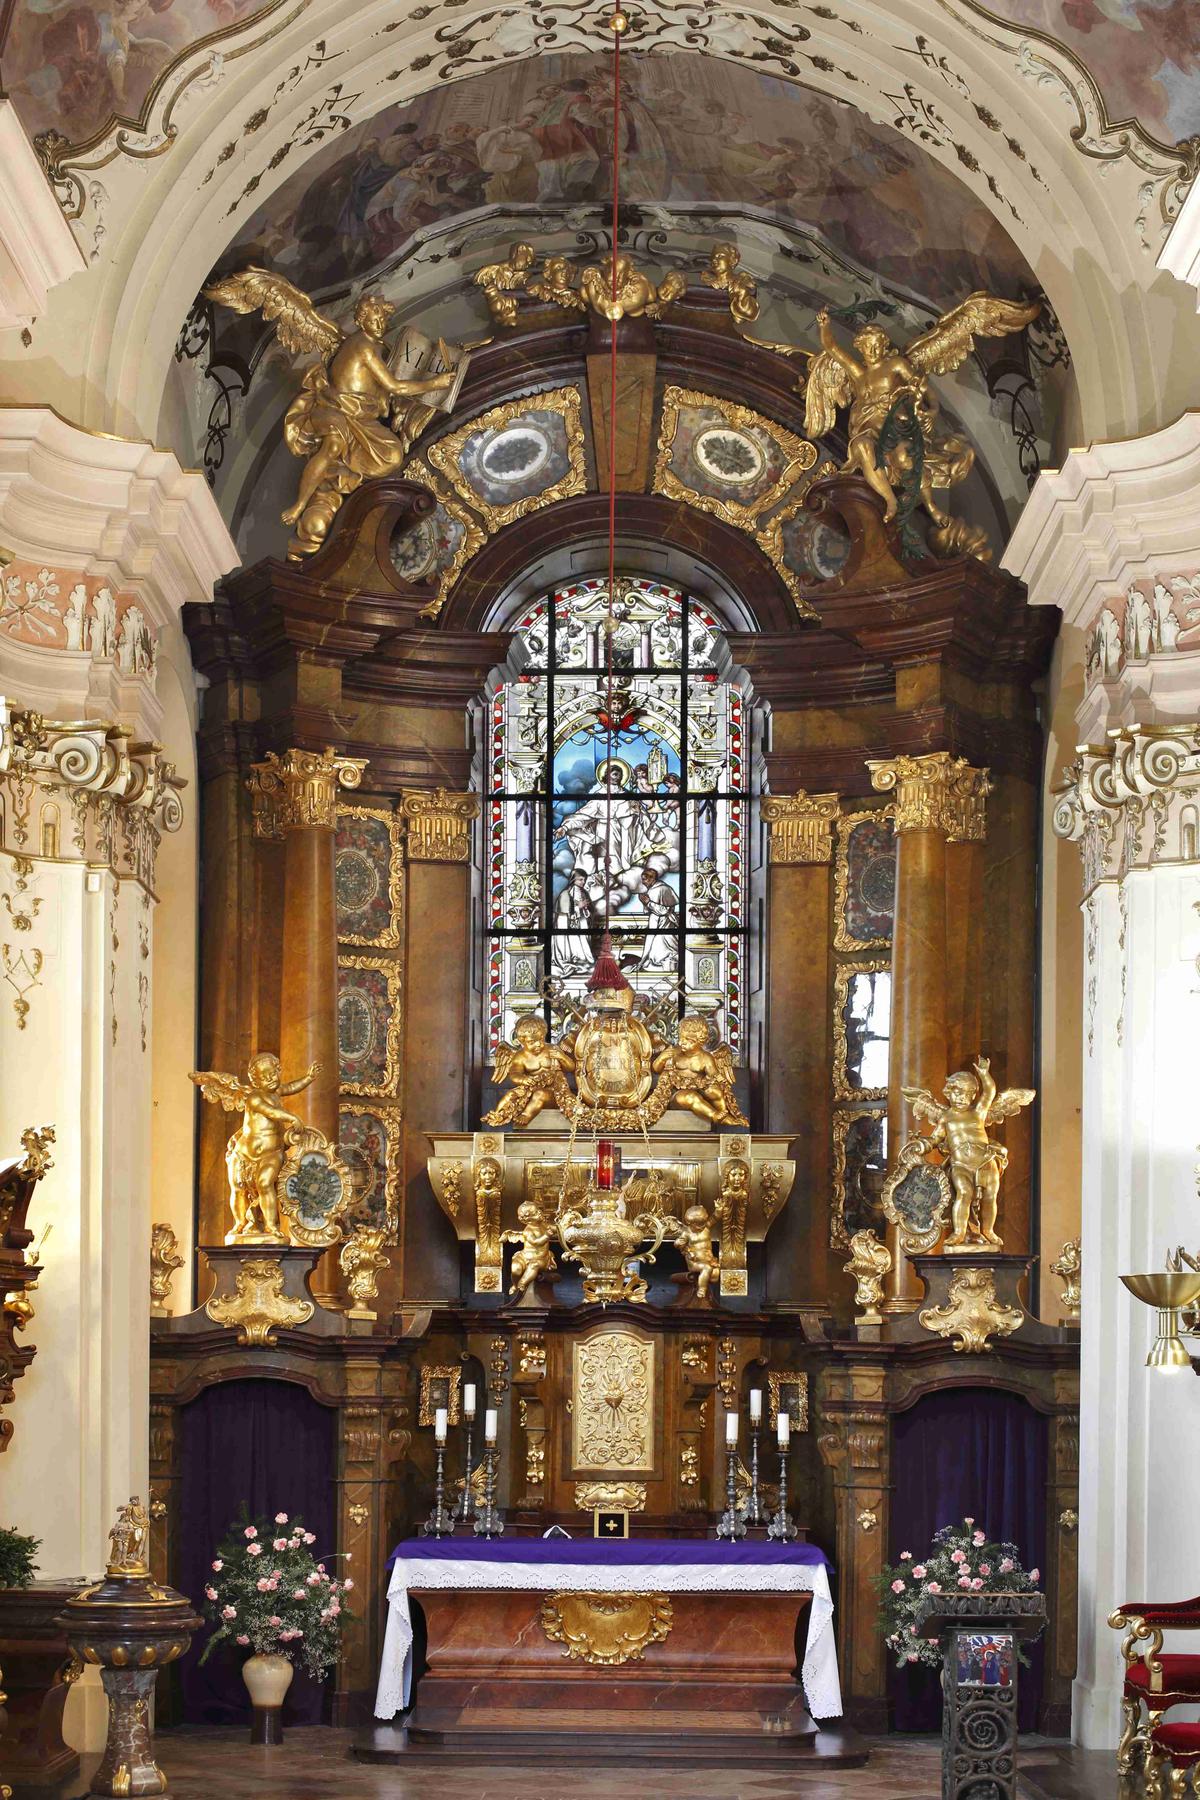 The Chapel of St. Norbert at Strahov Abbey contains the coffin of St. Norbert which rests above the main altar. (Photo courtesy of <a href="https://www.strahovskyklaster.cz/en/">Strahov monastery</a>)